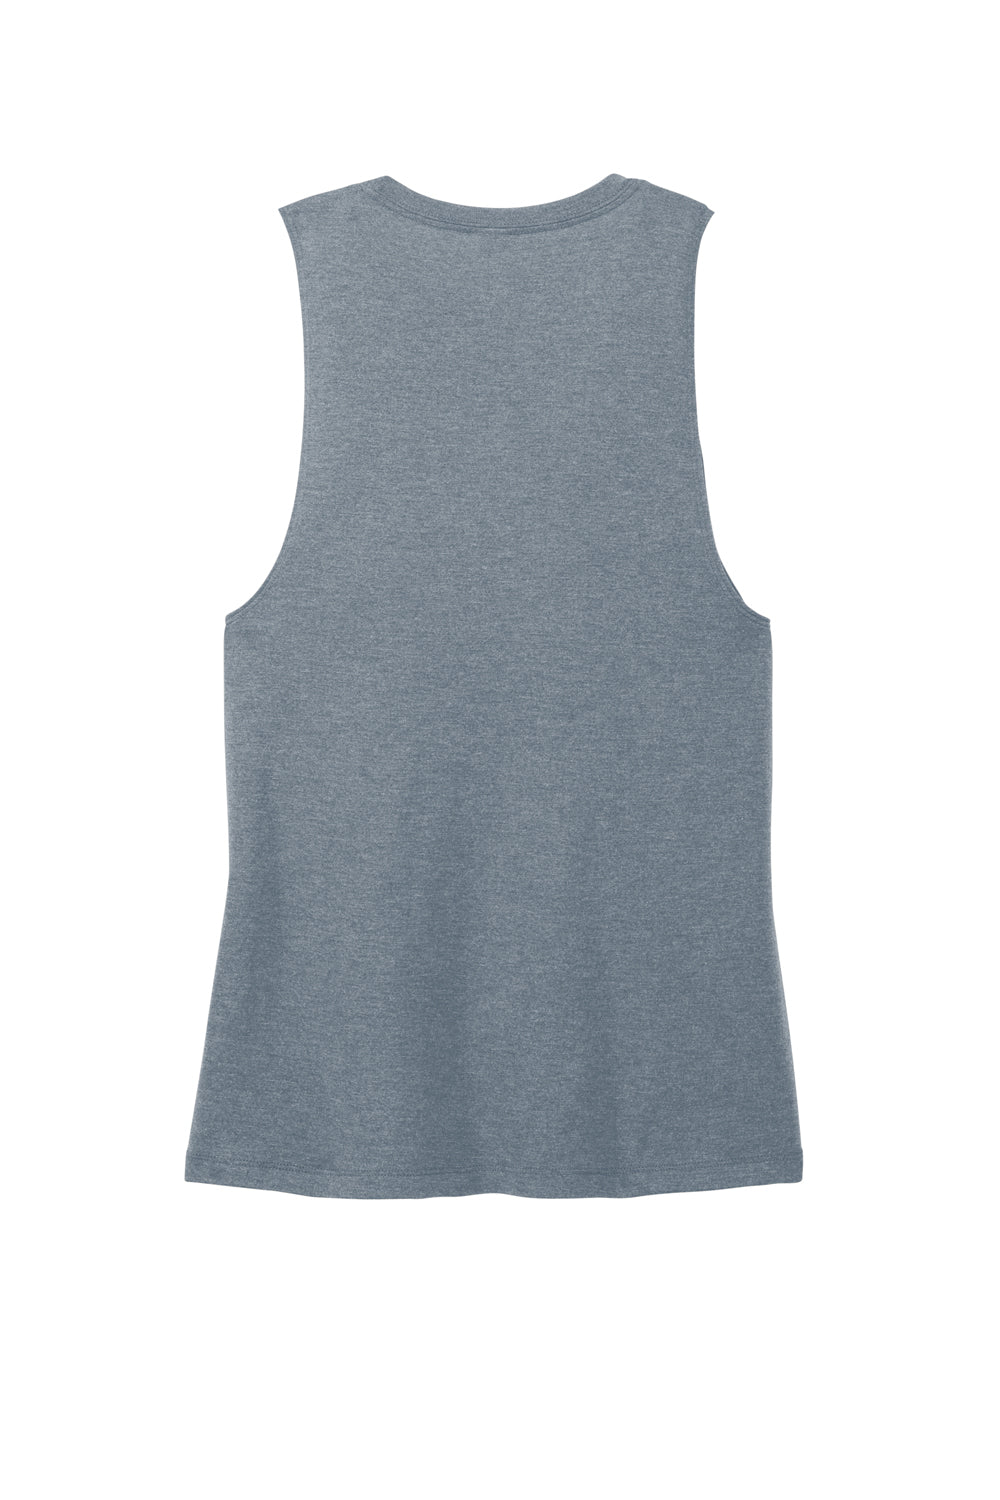 District DT153 Womens Perfect Tri Muscle Tank Top Heather Flint Blue Flat Back